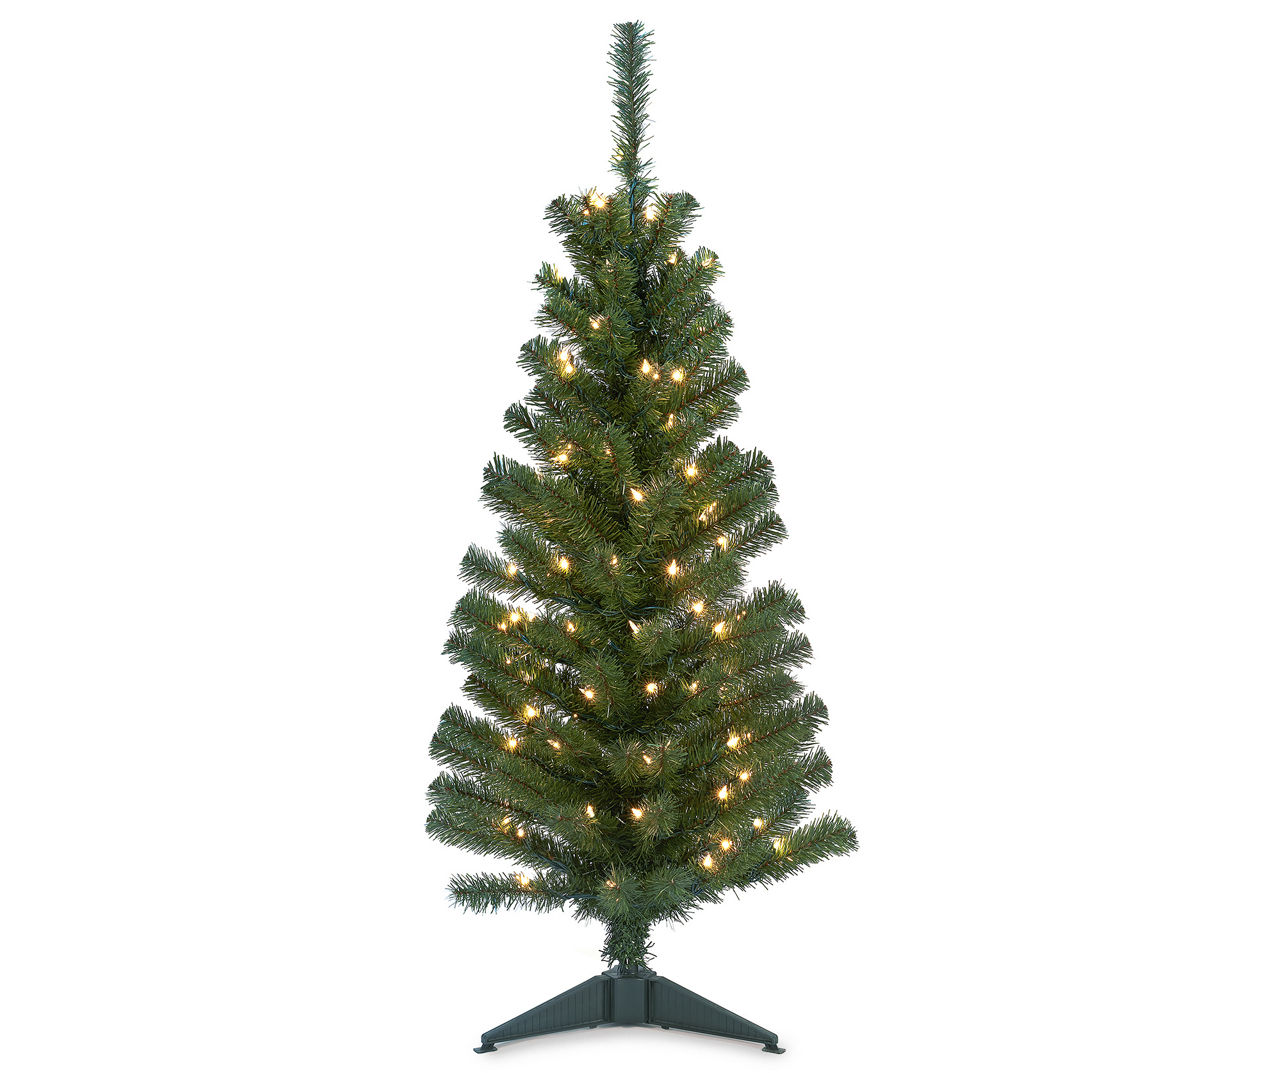 4' Yuletide Green Pre-Lit Artificial Christmas Tree with Clear Lights